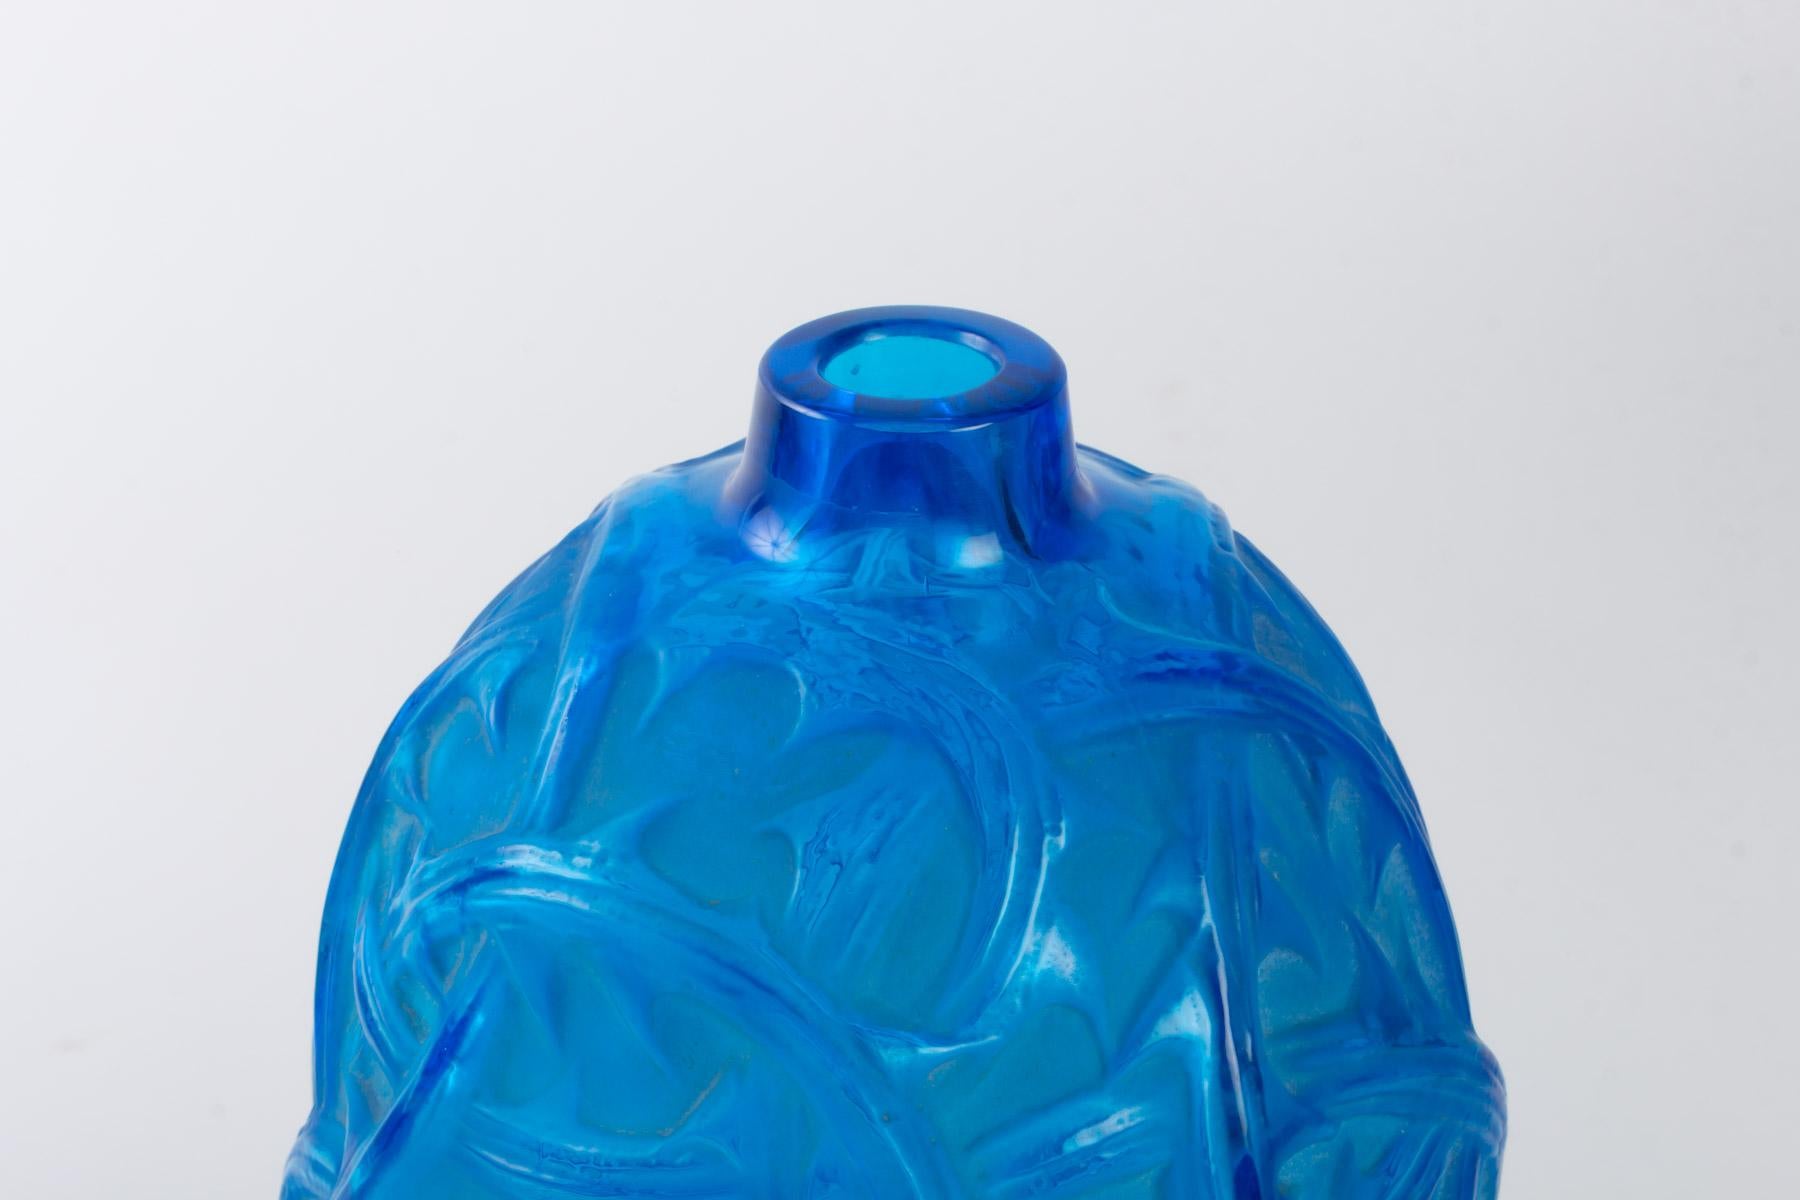 Art Deco 1921 René Lalique Ronces Vase in Blue Electric Glass with White Stain